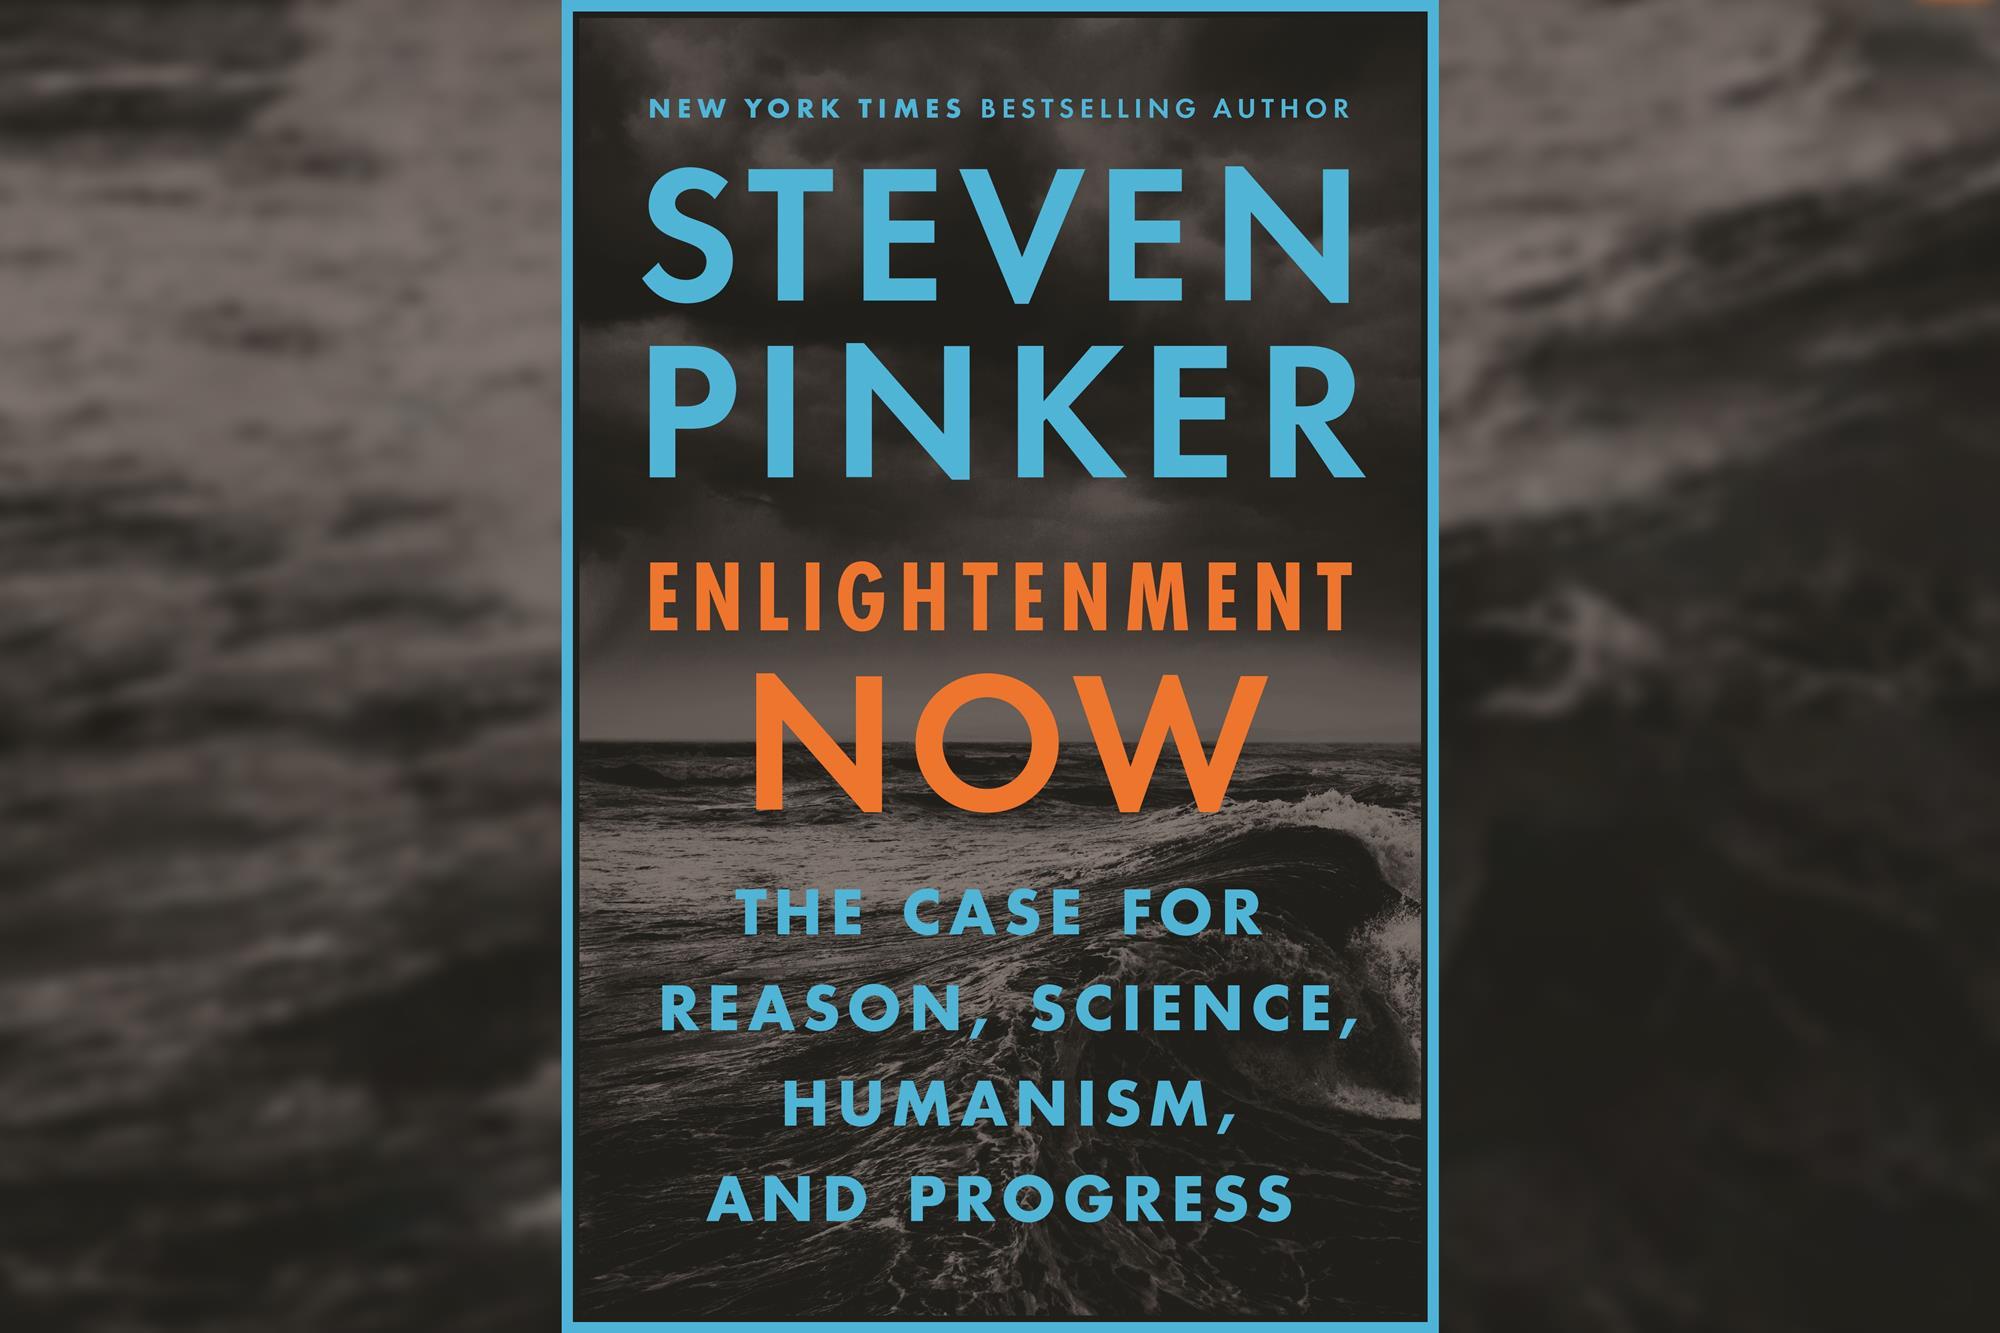 13-intriguing-facts-about-enlightenment-now-steven-pinker